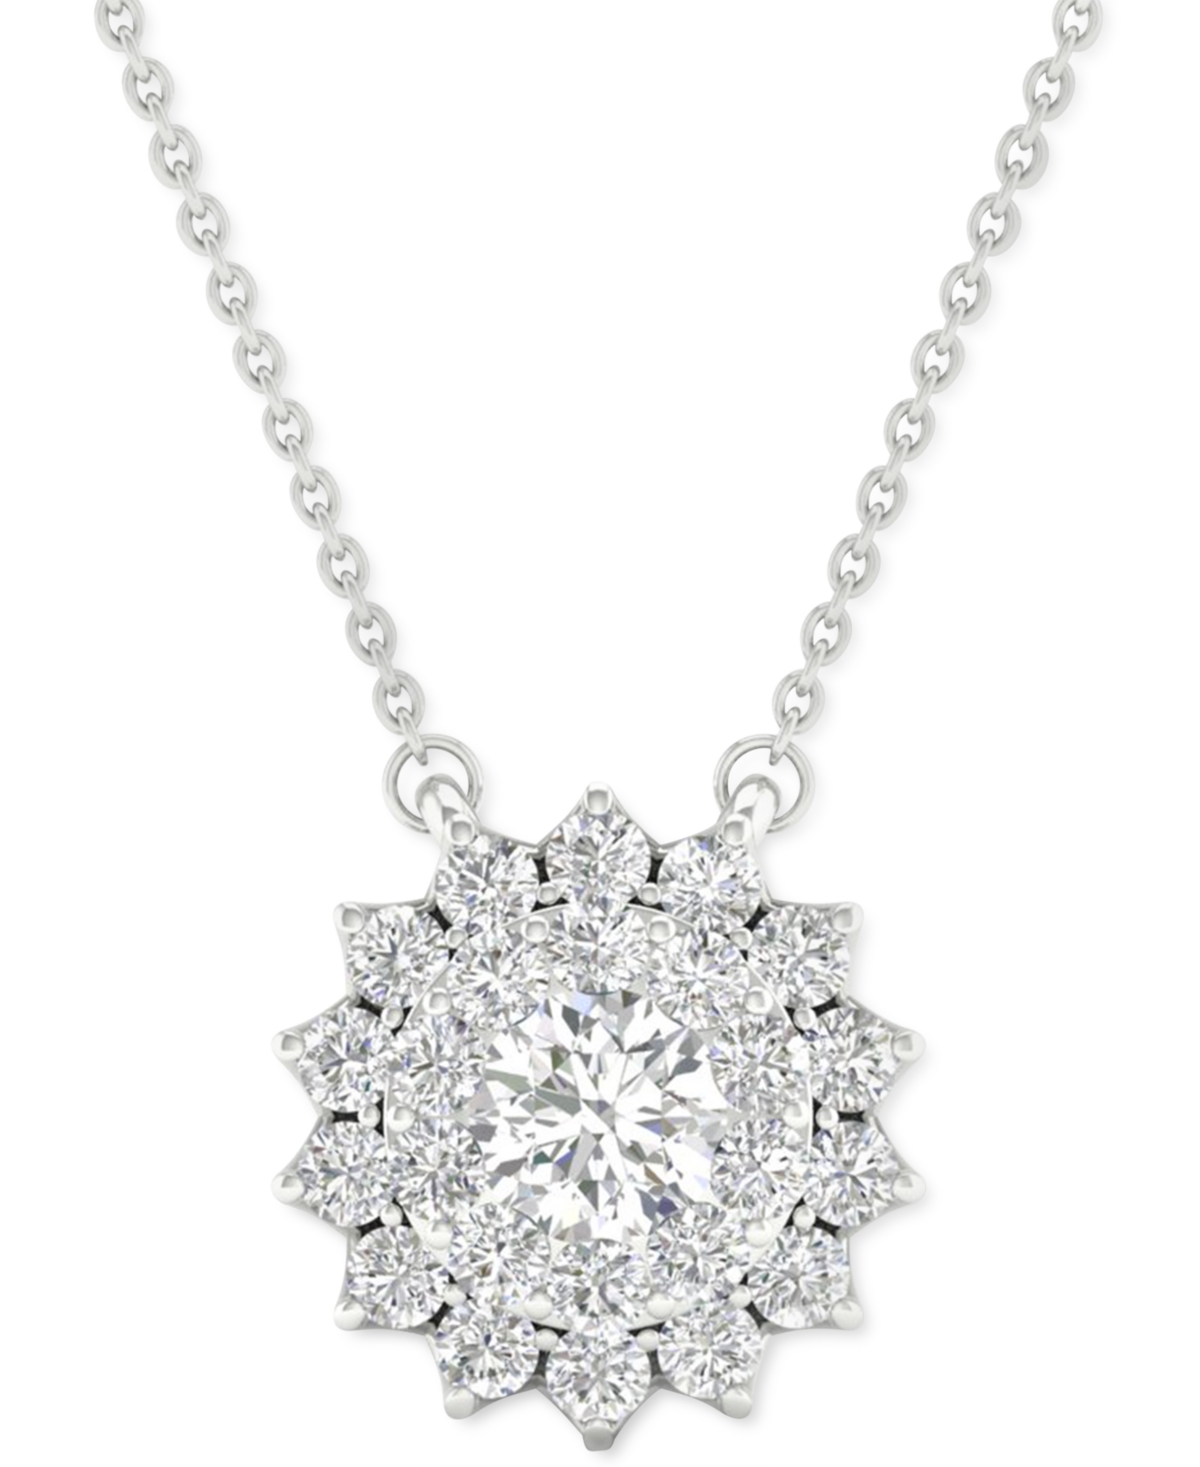 Lab Grown Diamond Sunburst 18" Pendant Necklace (1/2 ct. t.w.) in Sterling Silver - Sterling Silver